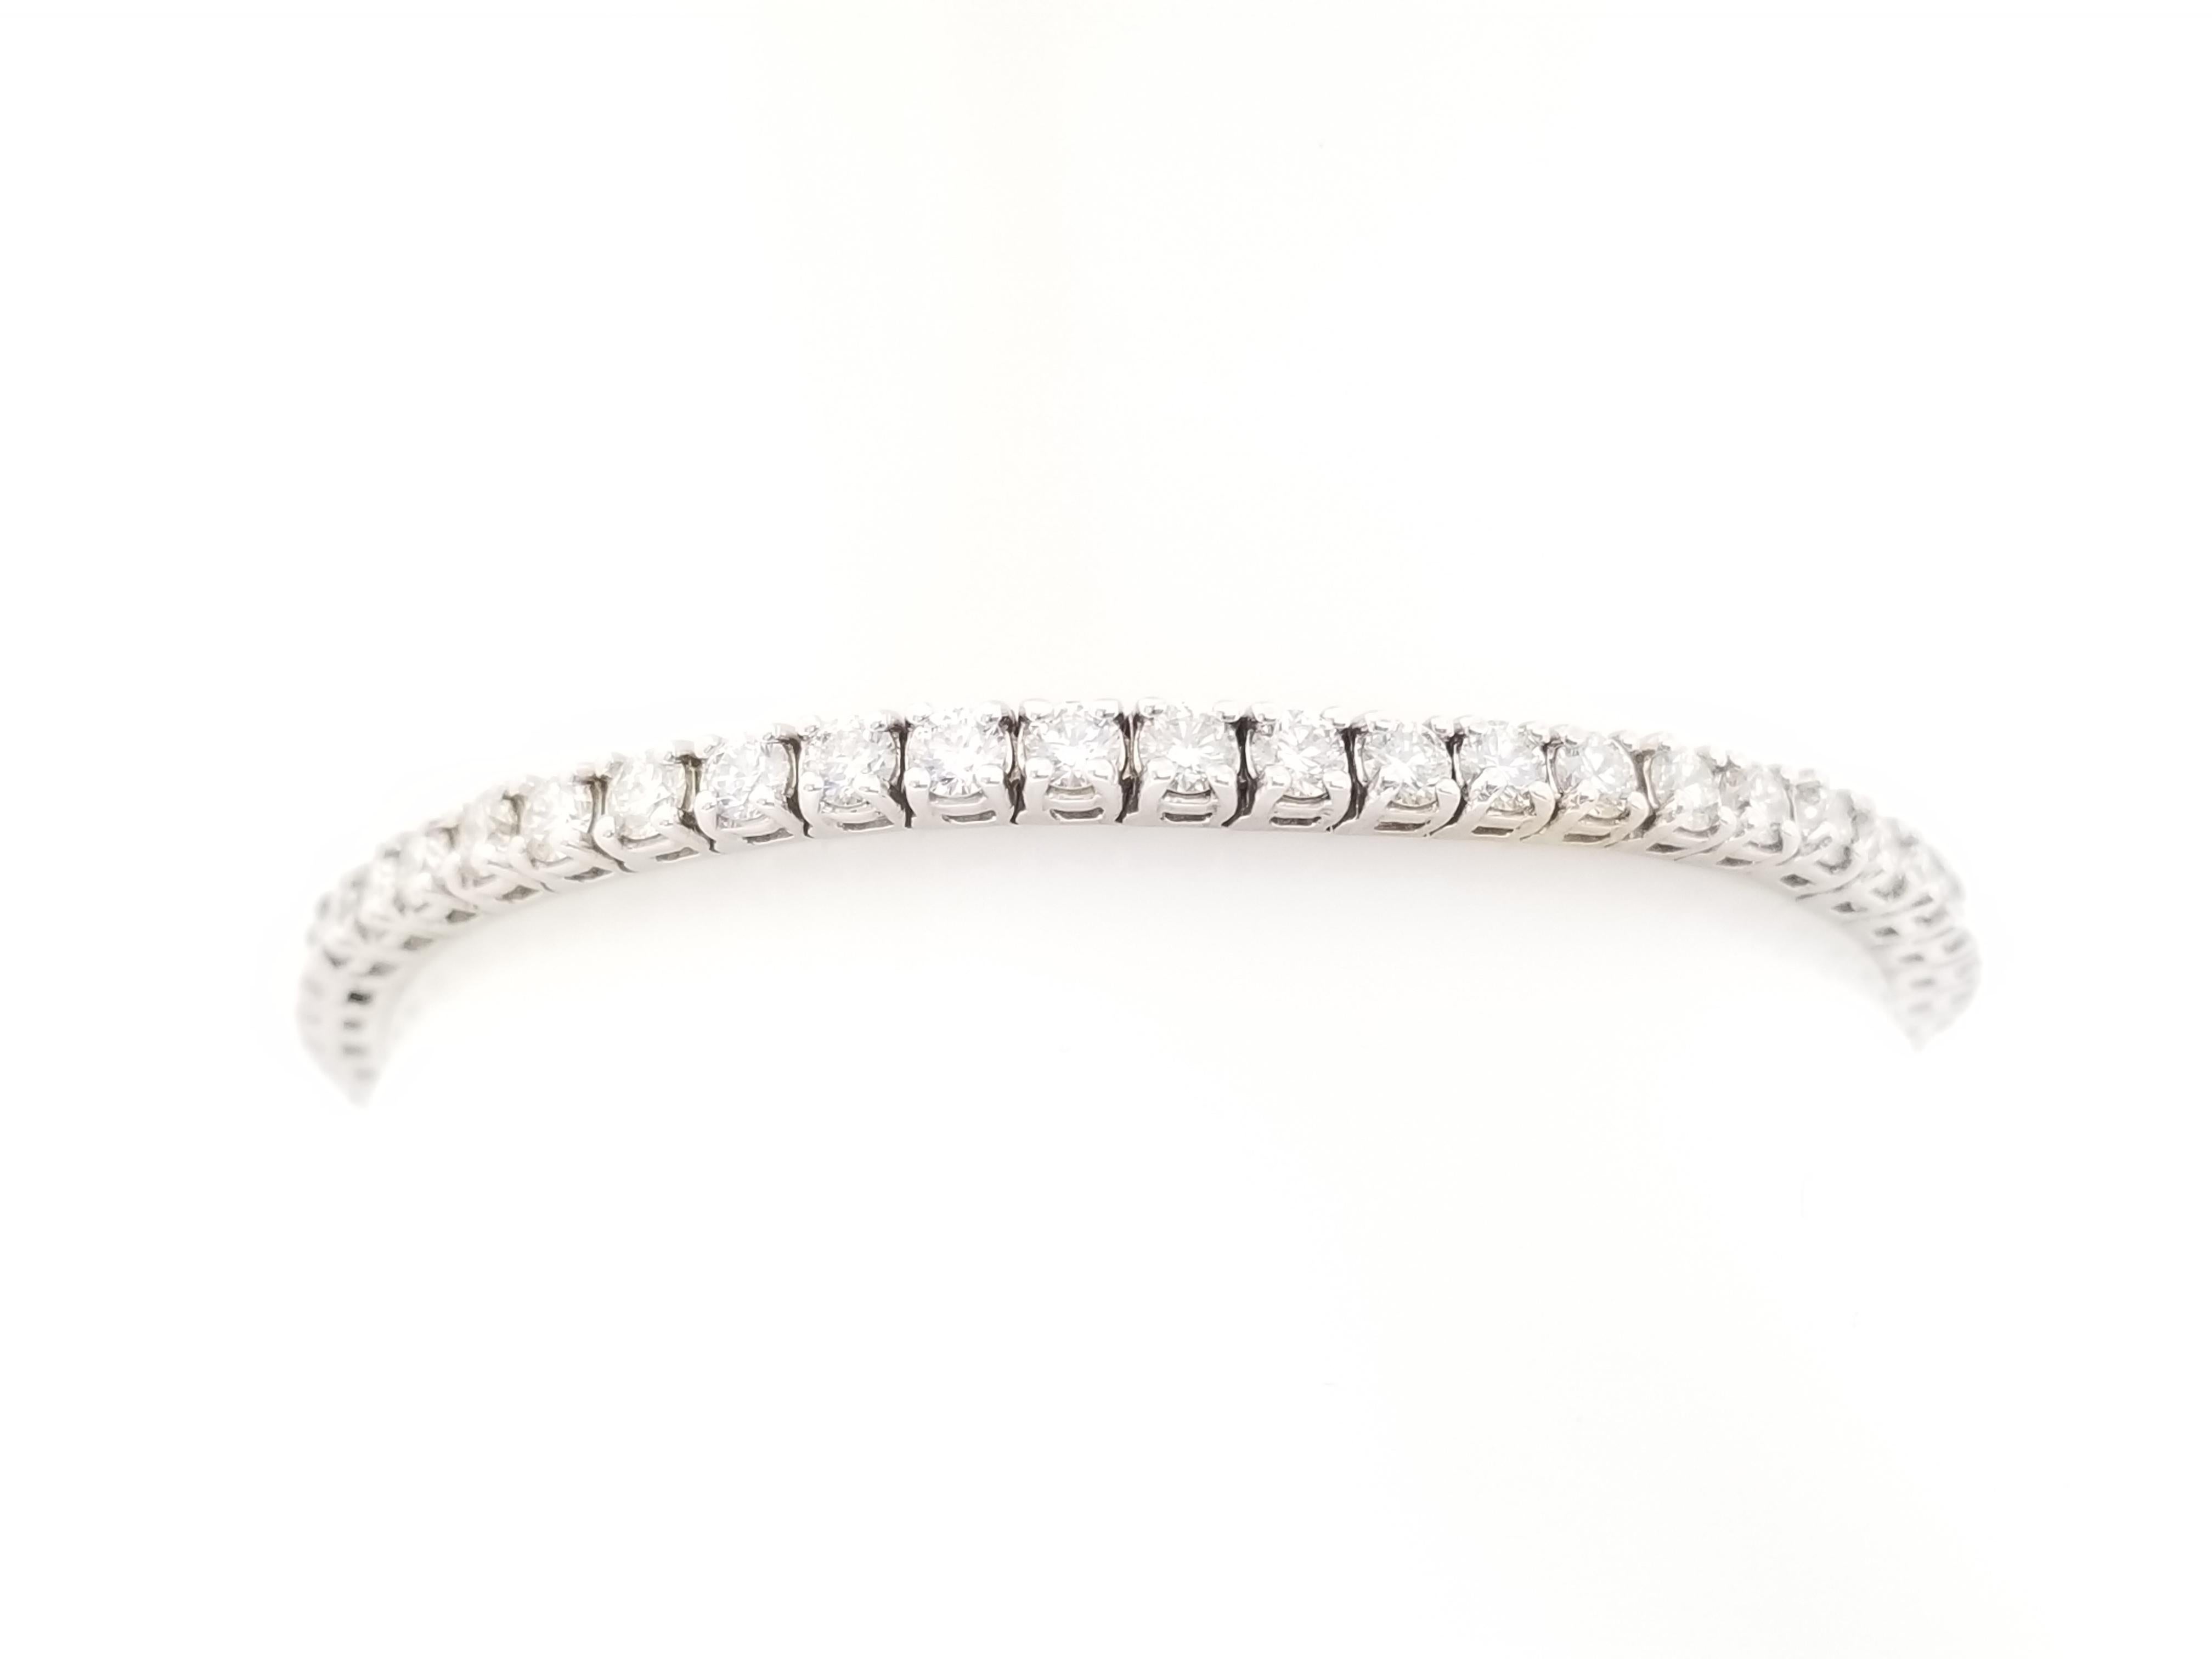 Brilliant and beautiful, set on 14K white gold. each stone is set in a classic four-prong style for maximum light brilliance. Bright and Shiny, Bold and Beautiful.

Natural Diamond 4.91 ctw
7 inch length. 
Average Color I, Clarity SI 
3.2 mm